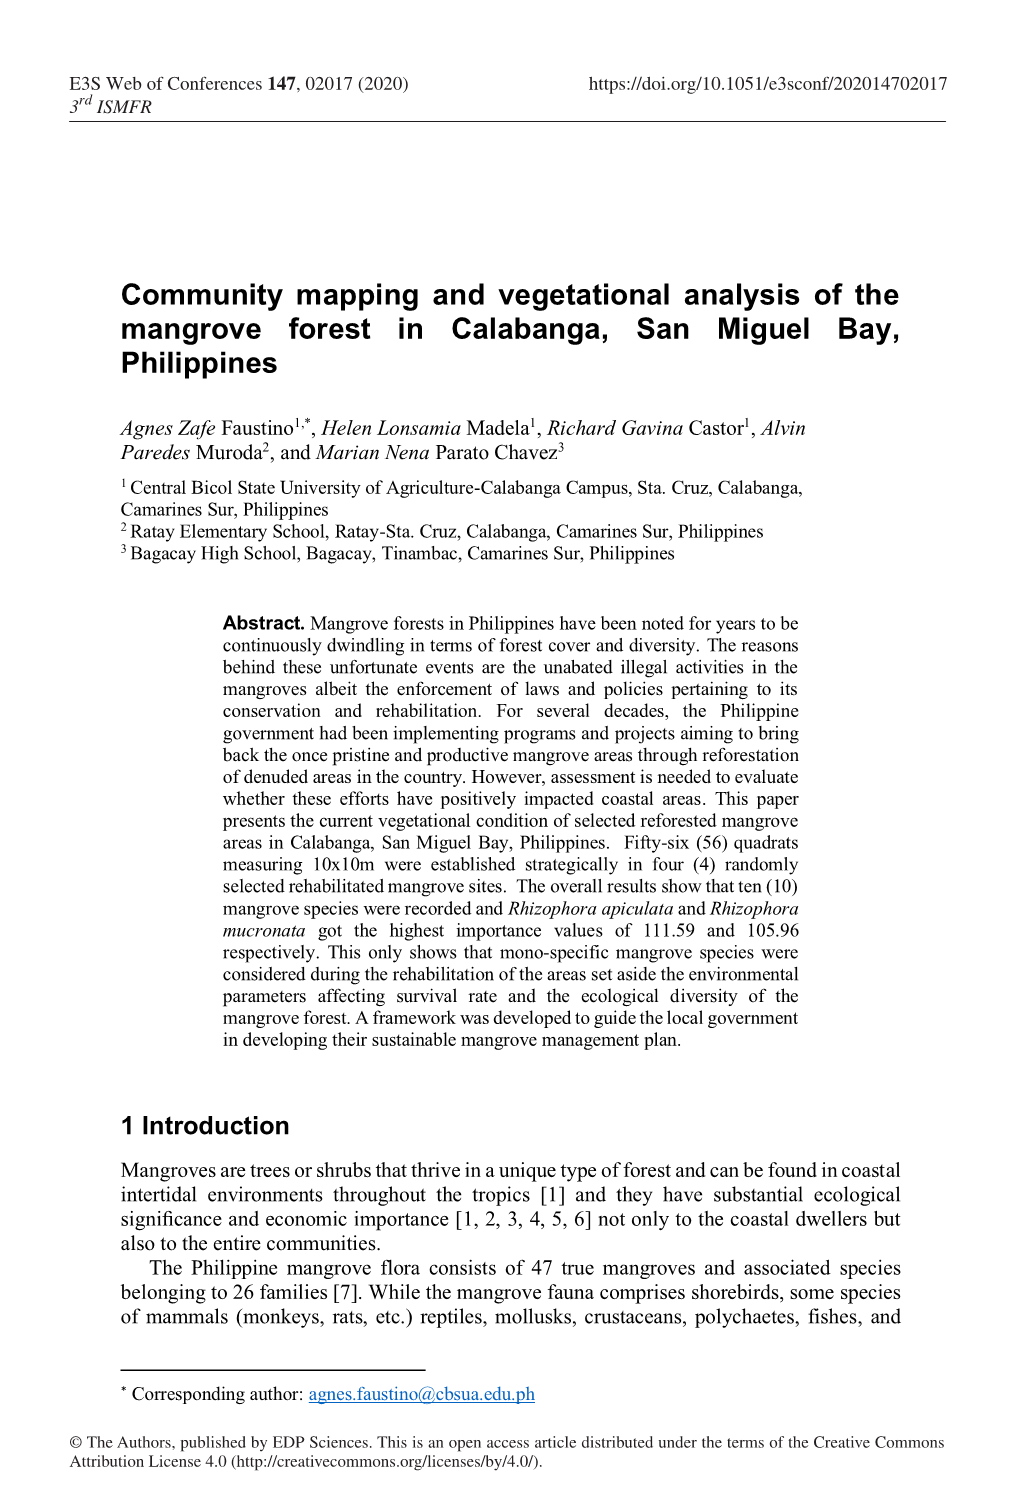 Community Mapping and Vegetational Analysis of the Mangrove Forest in Calabanga, San Miguel Bay, Philippines